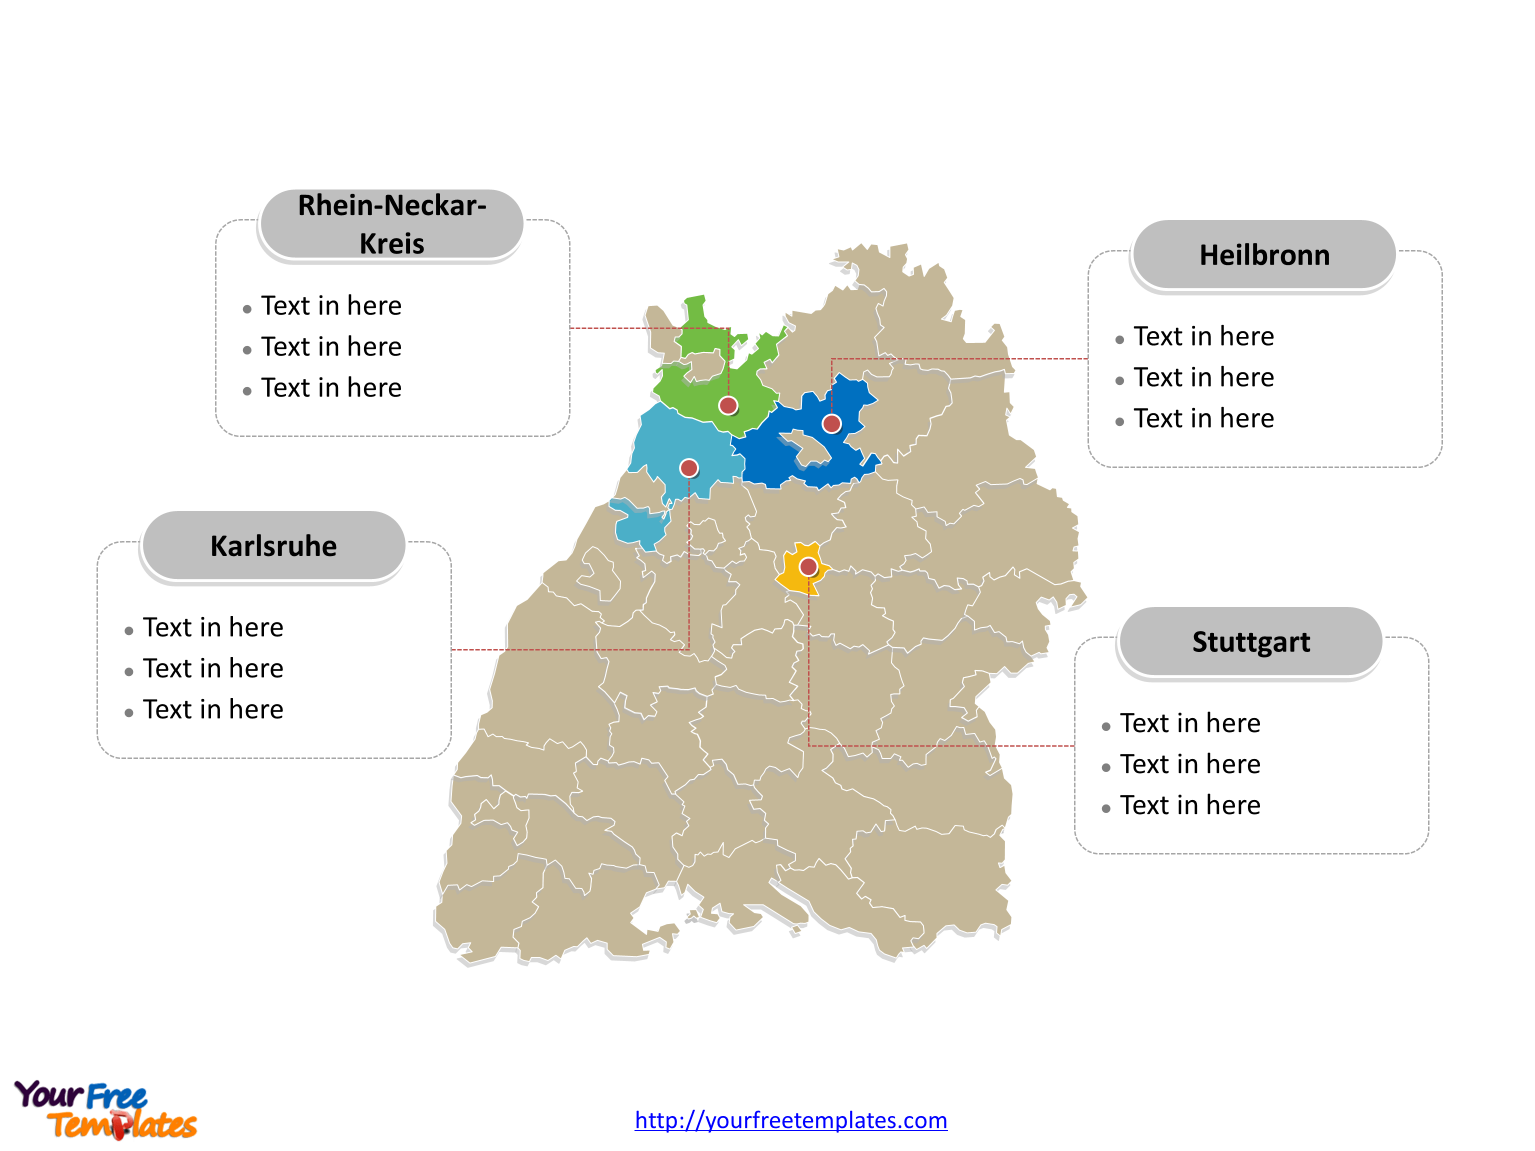 Baden-Württemberg map labeled with major political districts